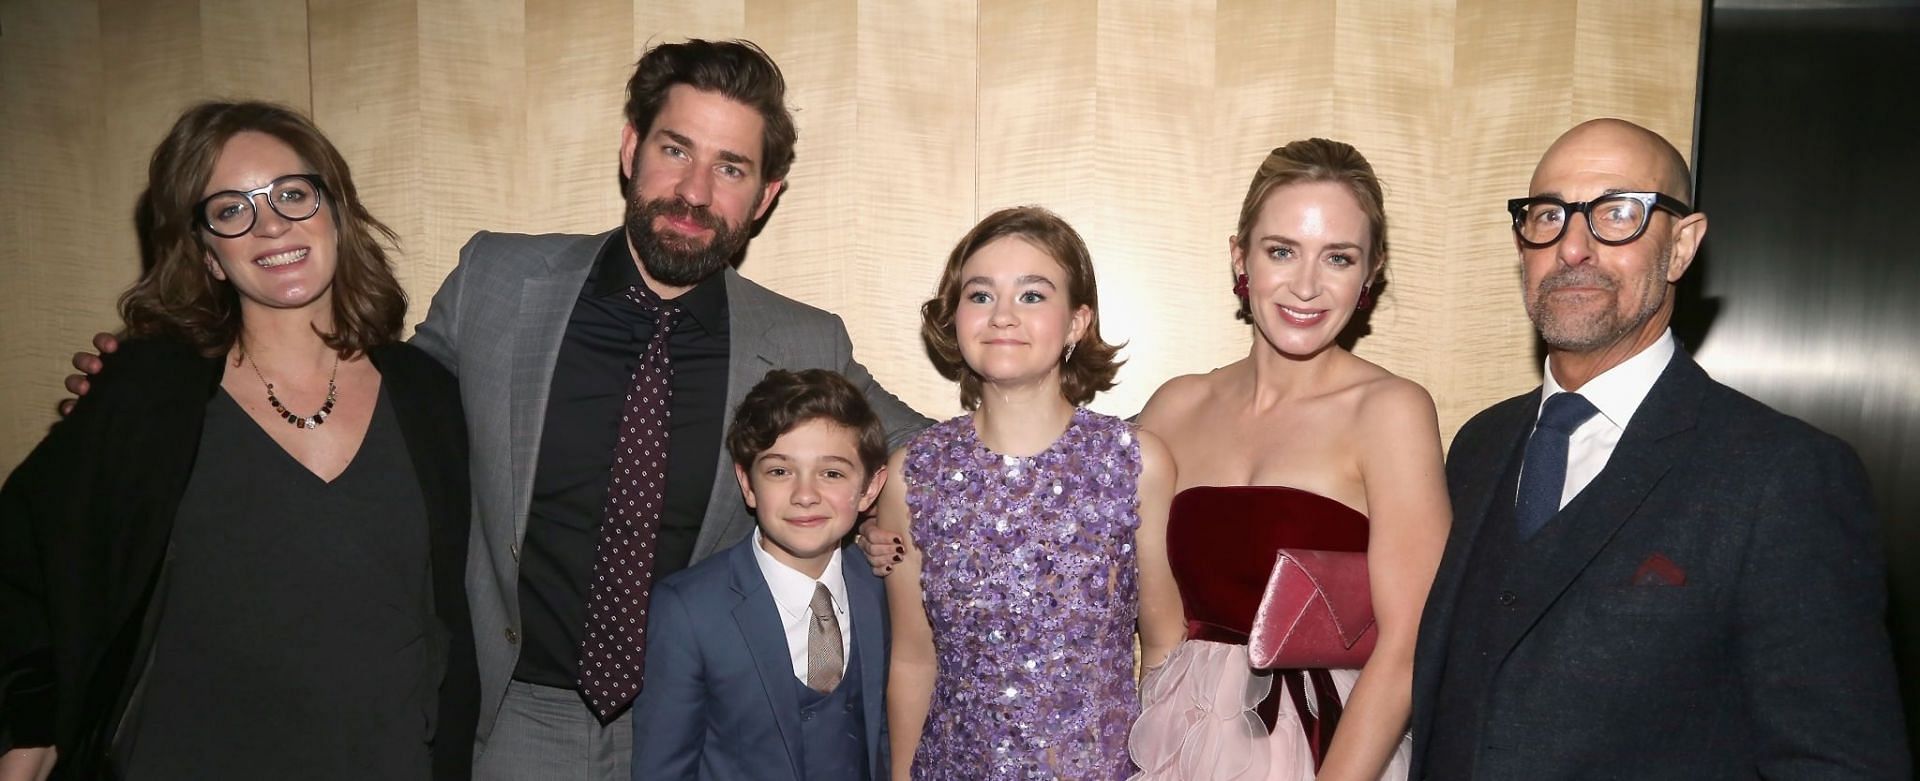 Felicity Blunt and Stanley Tucci with Emily Blunt, John Krasinski, Noah Jupe and Millicent Simmonds at the premiere of A Quiet Place (Image via Getty Images/Sylvain Gaboury)